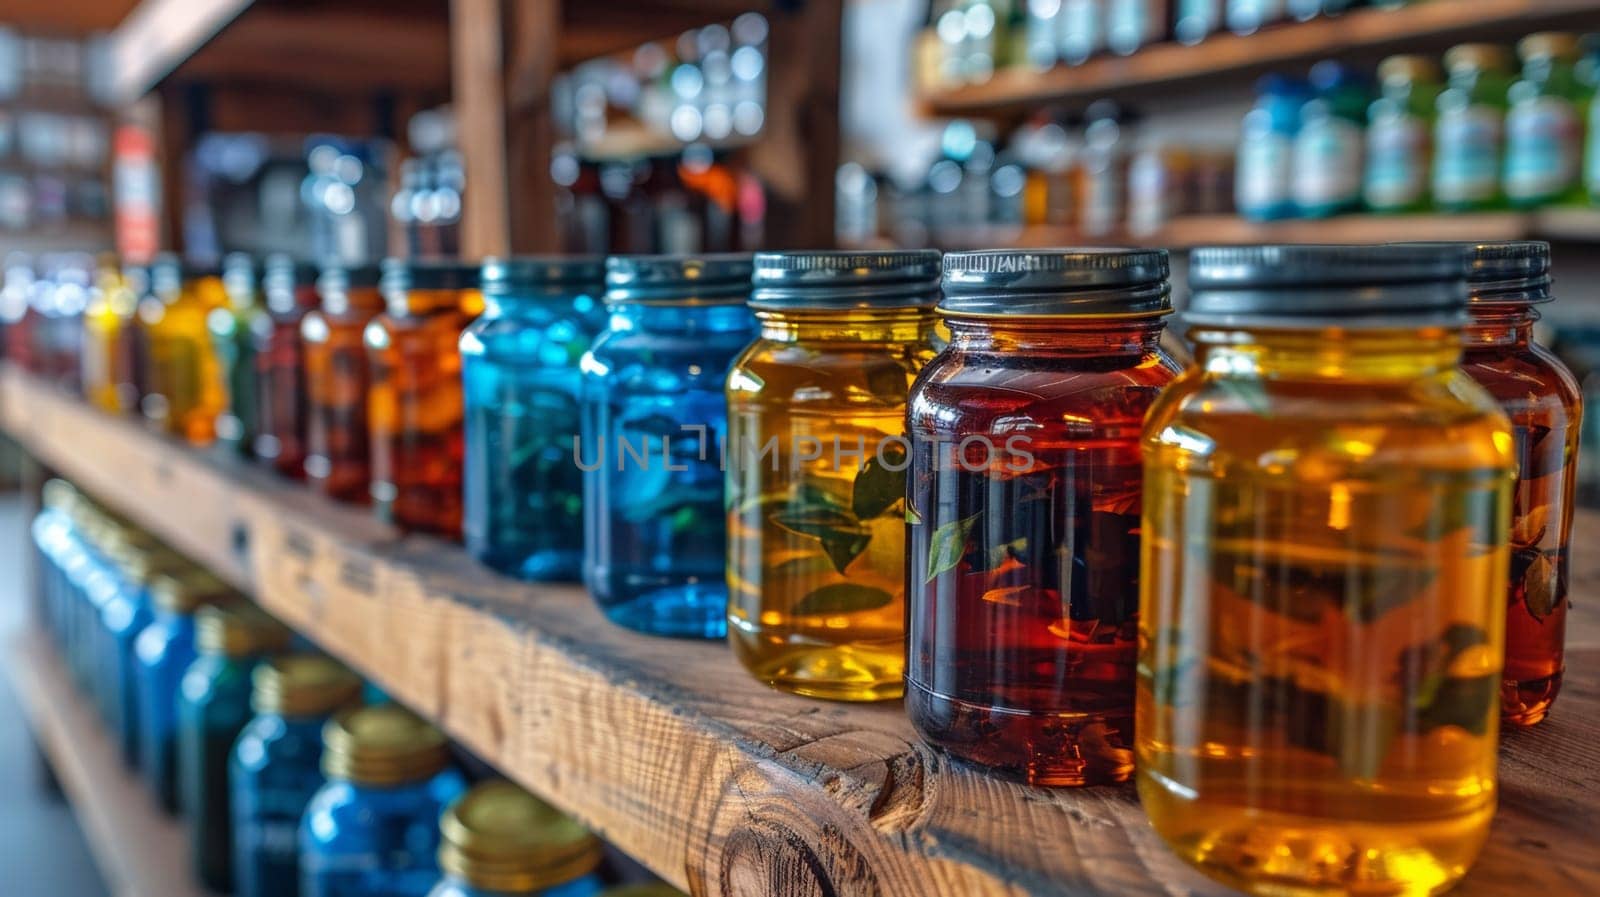 A row of jars filled with different colored liquids on a shelf, AI by starush